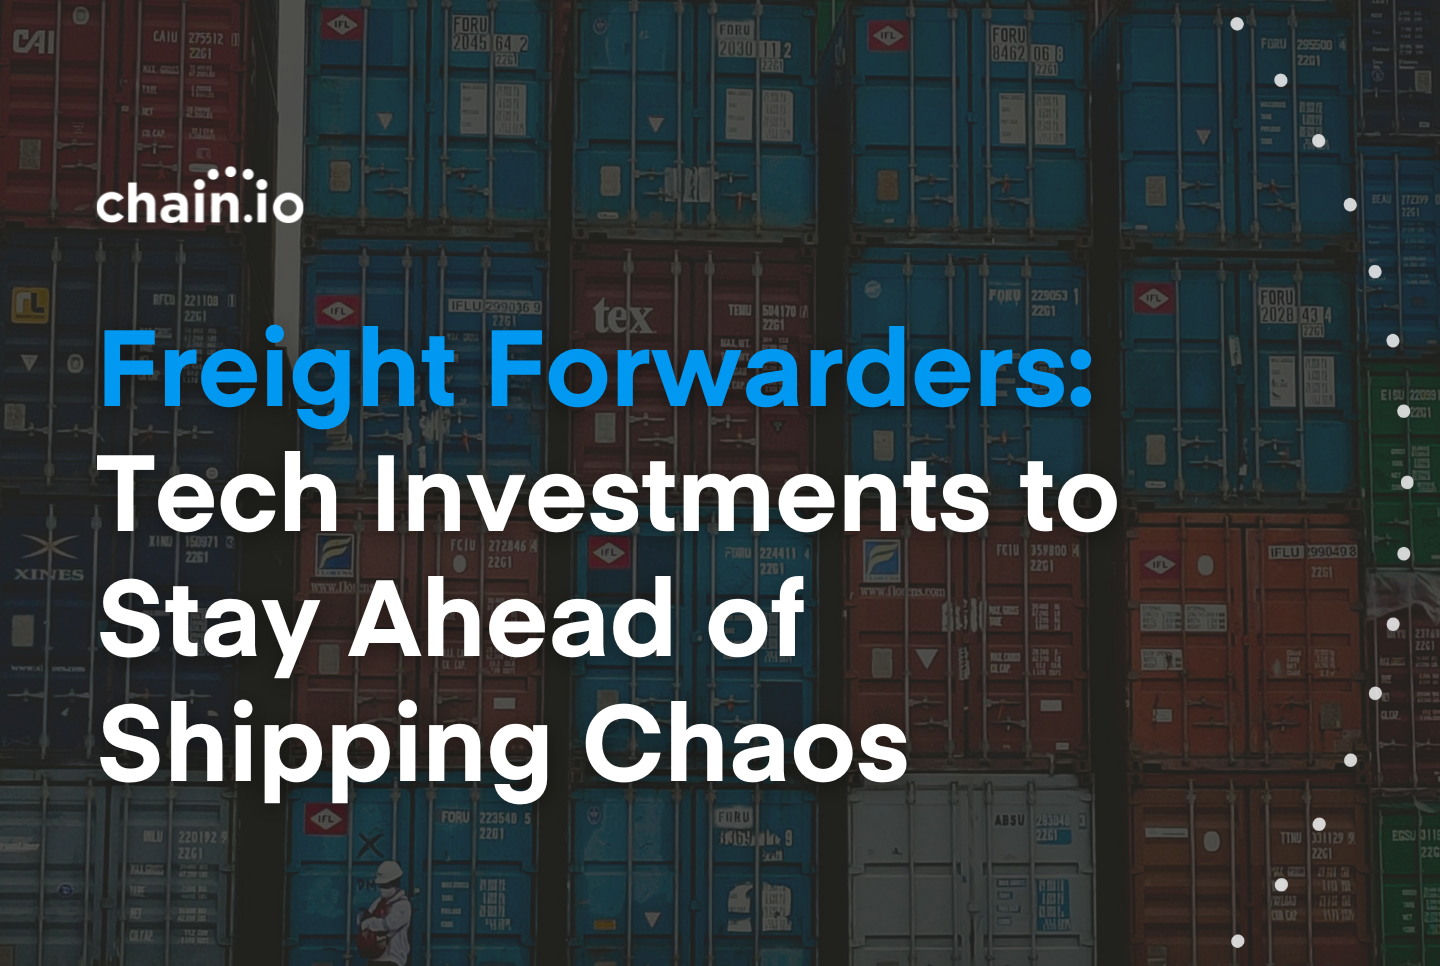 Shipping containers with text freight forwarders: tech investments to stay ahead of shipping chaos